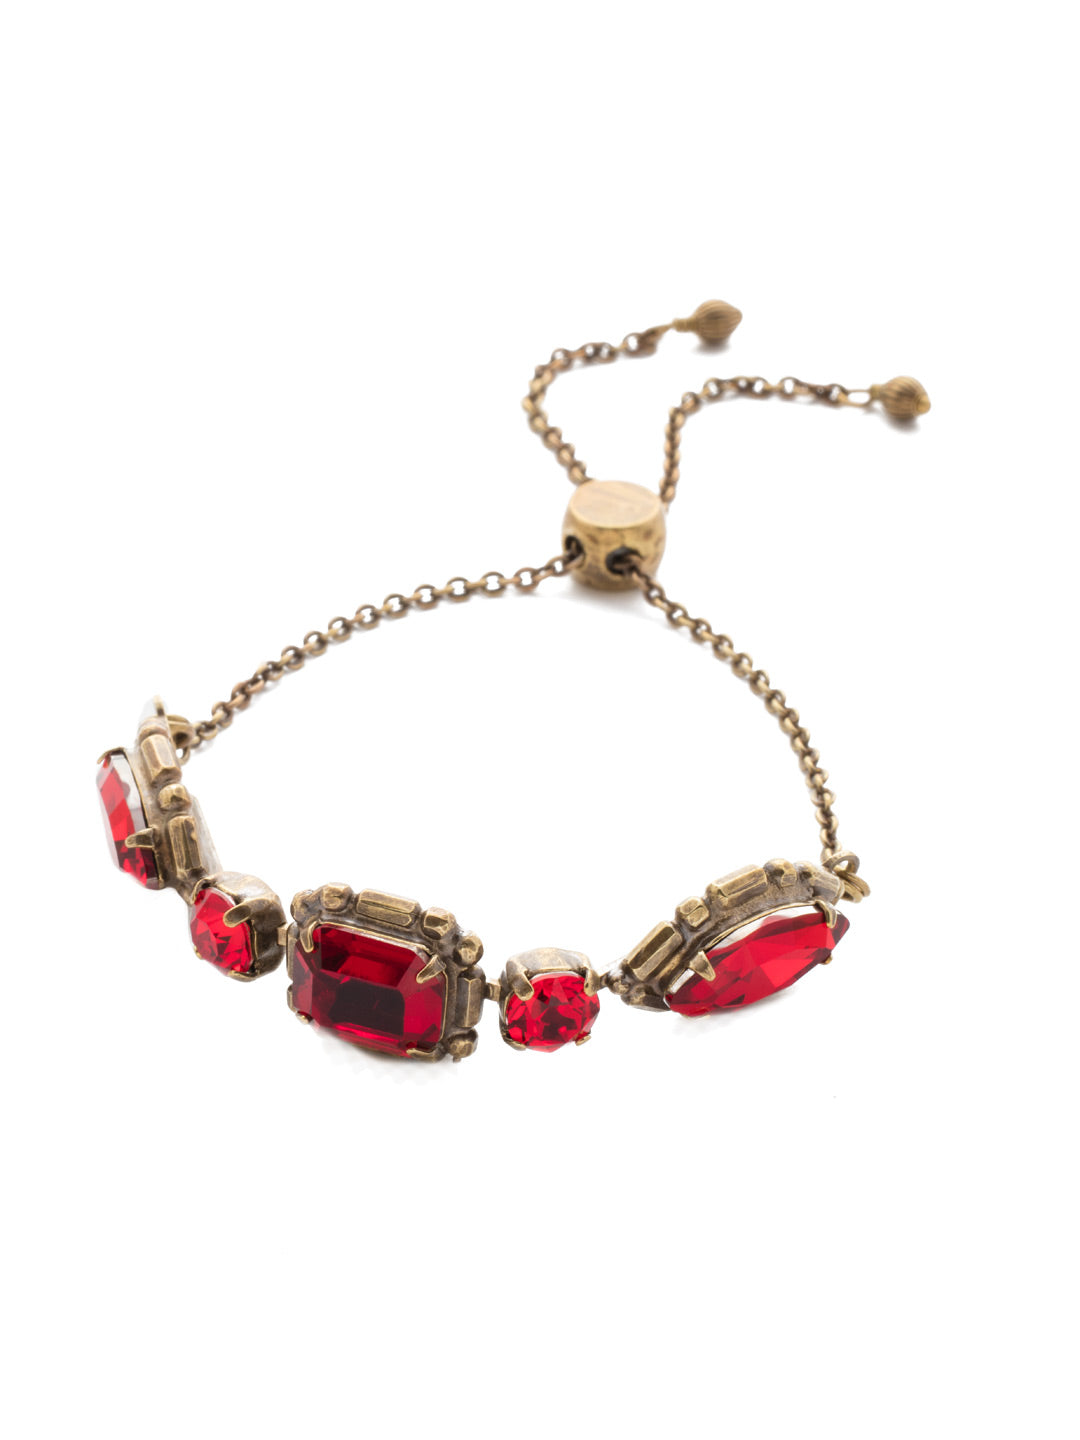 Tosca Slider Bracelet - BEA31AGSNR - <p>Simplicity and elegance combine to create this classic bracelet, with delicately cut crystals along the center completed with an adjustable chain to create the perfect fit. From Sorrelli's Sansa Red collection in our Antique Gold-tone finish.</p>